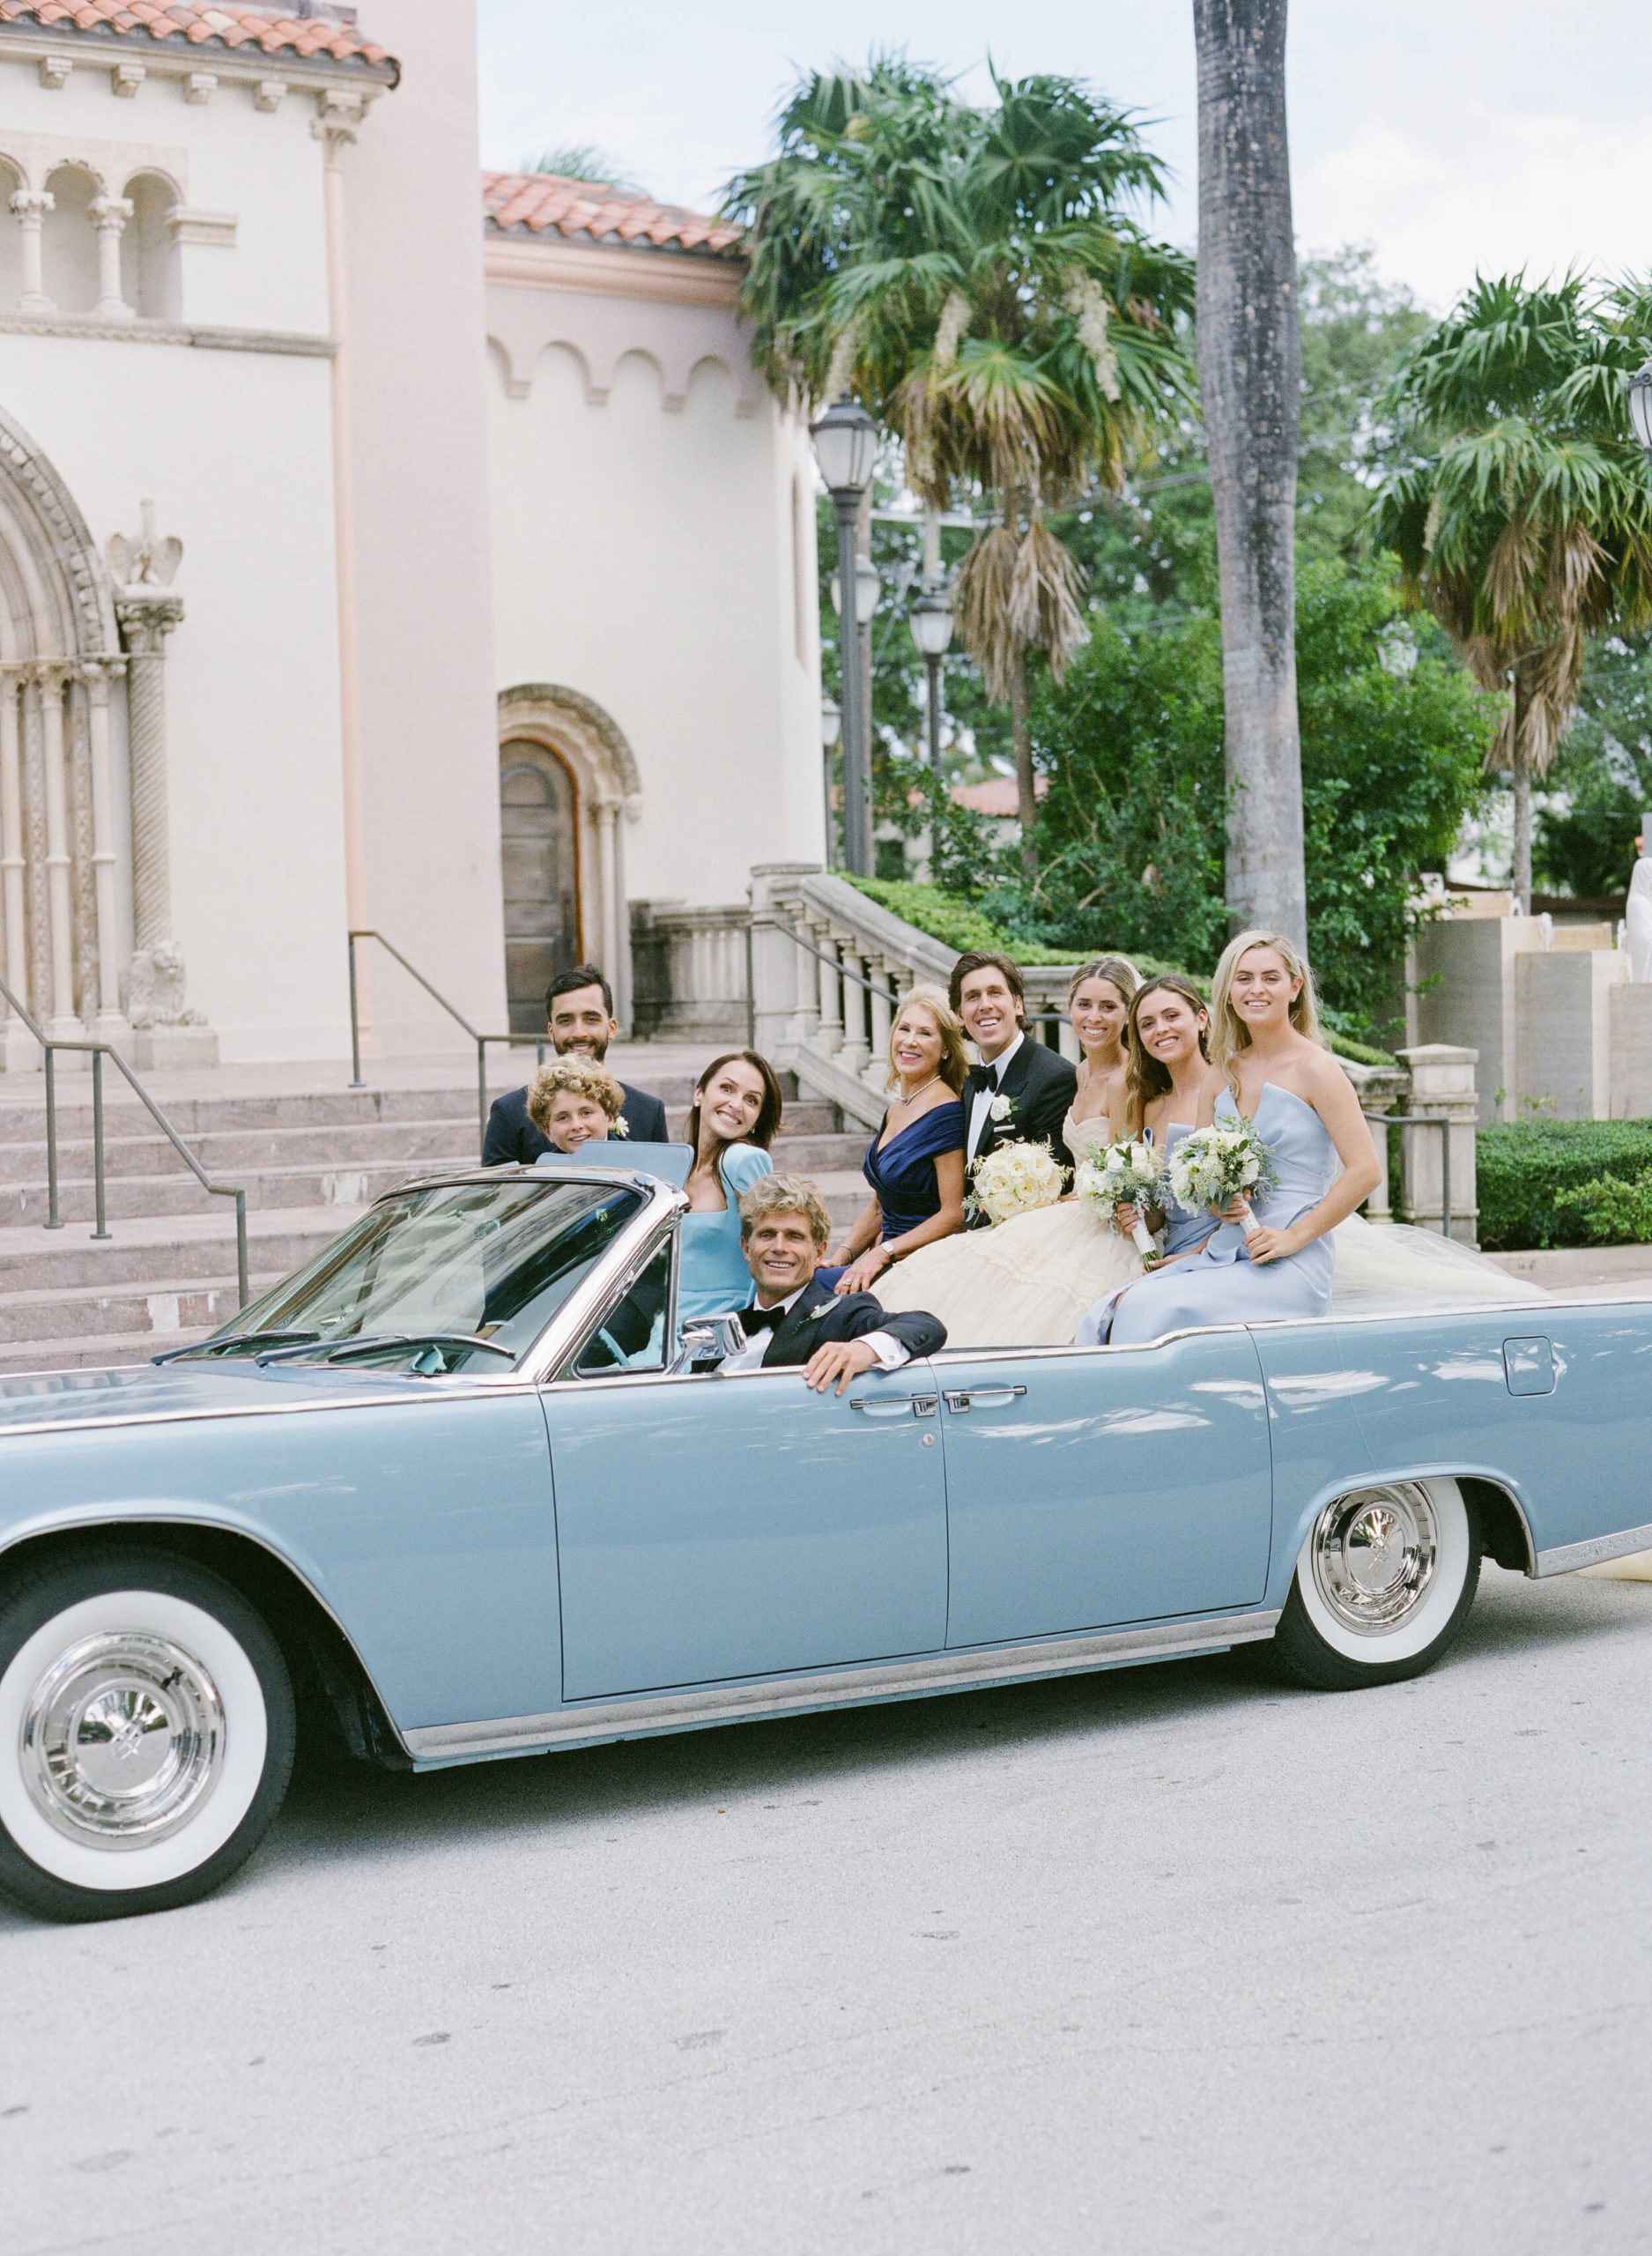 Eunice wore her grandmother's Dior wedding dress to get married in Miami to Michael "Mikey" Garcia. They were married at St. Patricks Catholic Church and drove away in a baby blue 1965 Lincoln Continental.